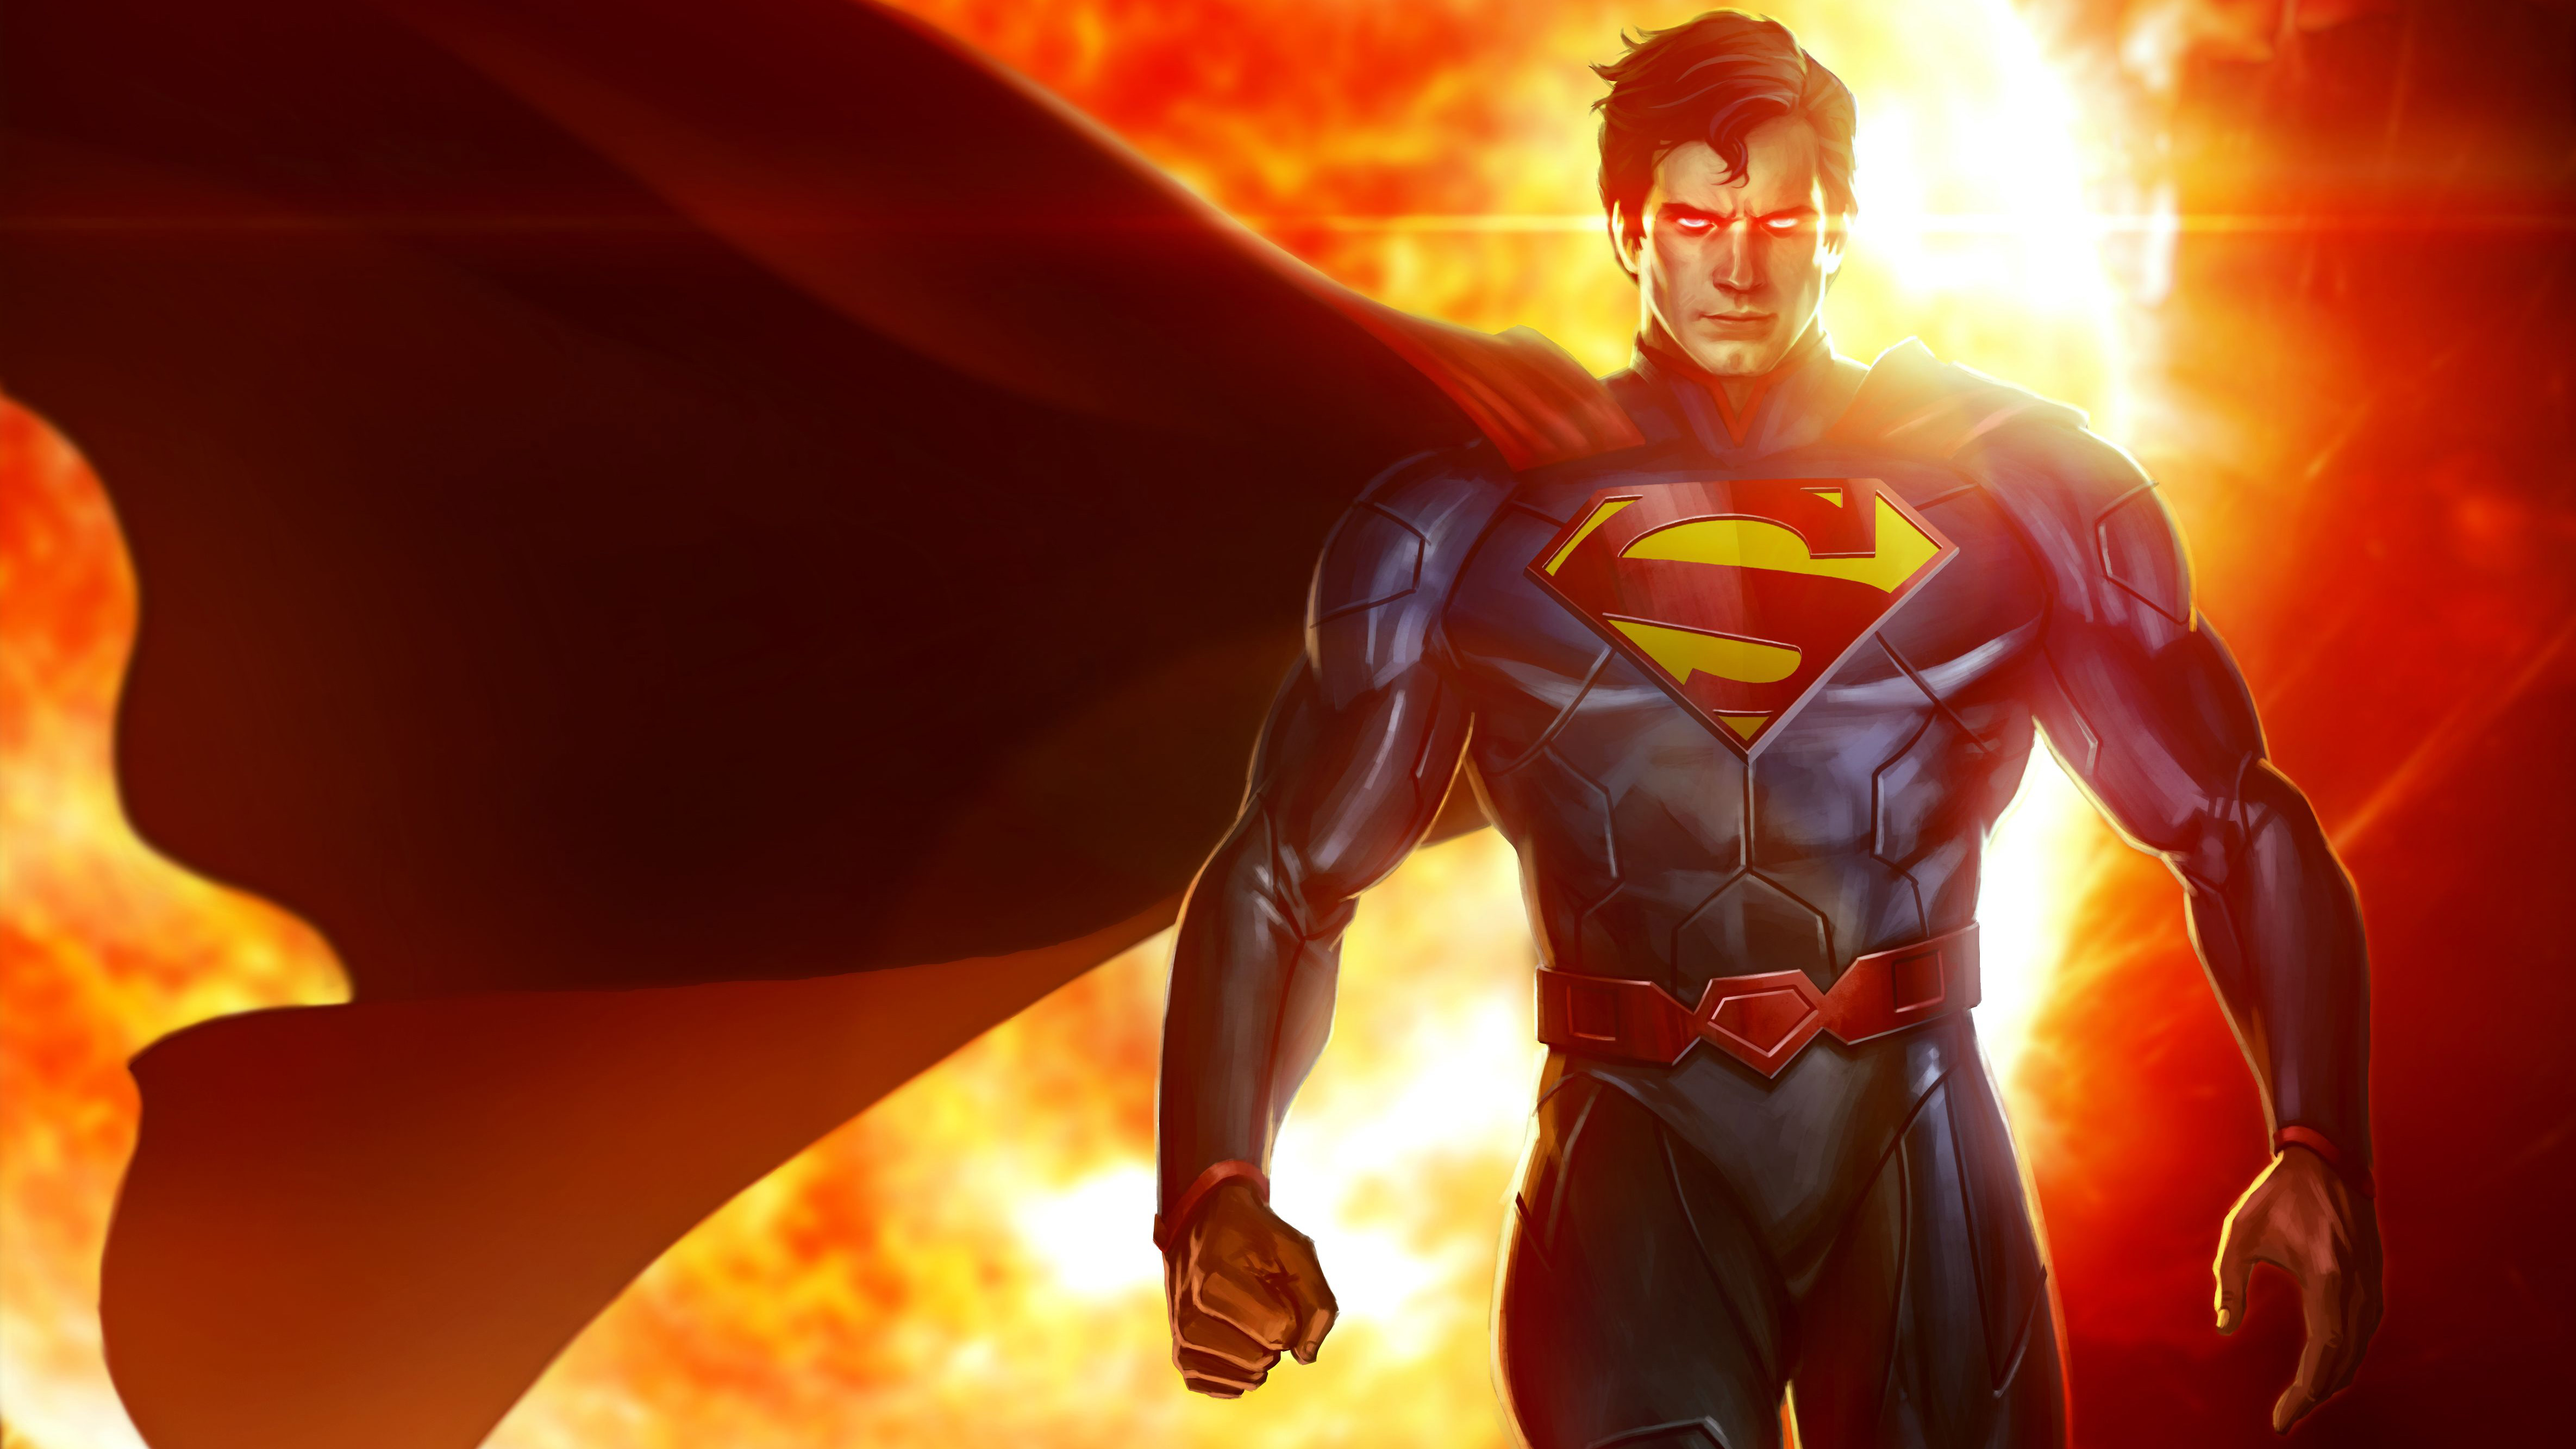 Superman 4K wallpapers for your desktop or mobile screen free and easy to  download